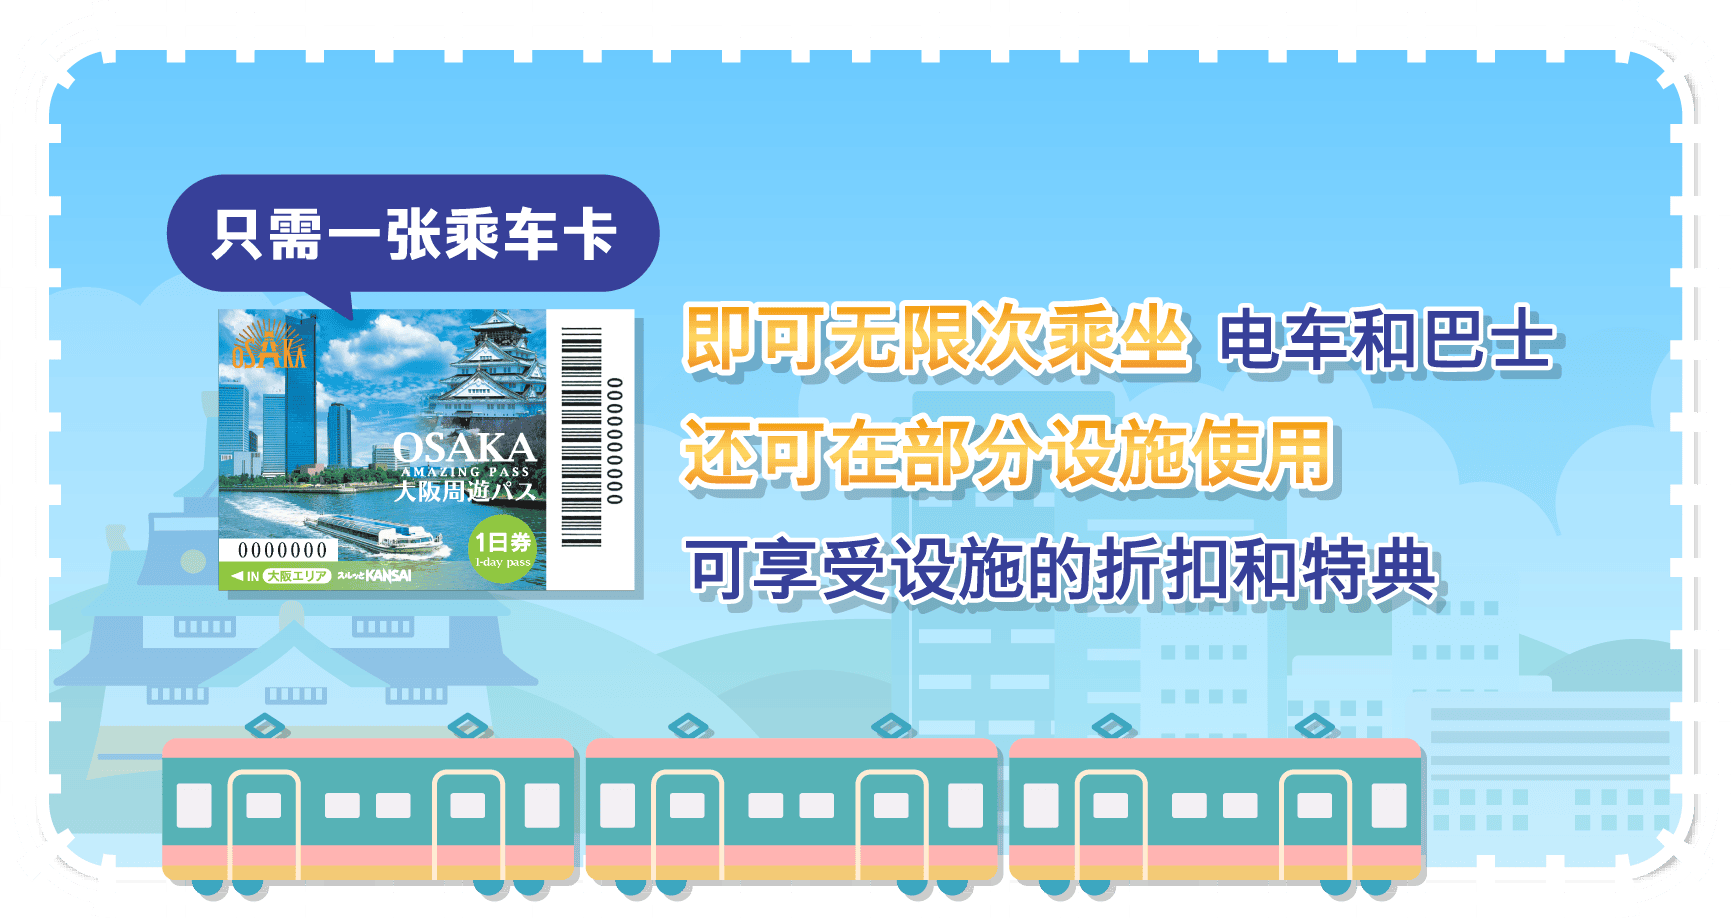 Allows you entry into approximately 40 sightseeing spots! Free one-day ride on buses and trains!Approximately 30 facilities and stores on special offers!Saves money and convenient if you are travelling around Osaka Osaka Amazing Pass!